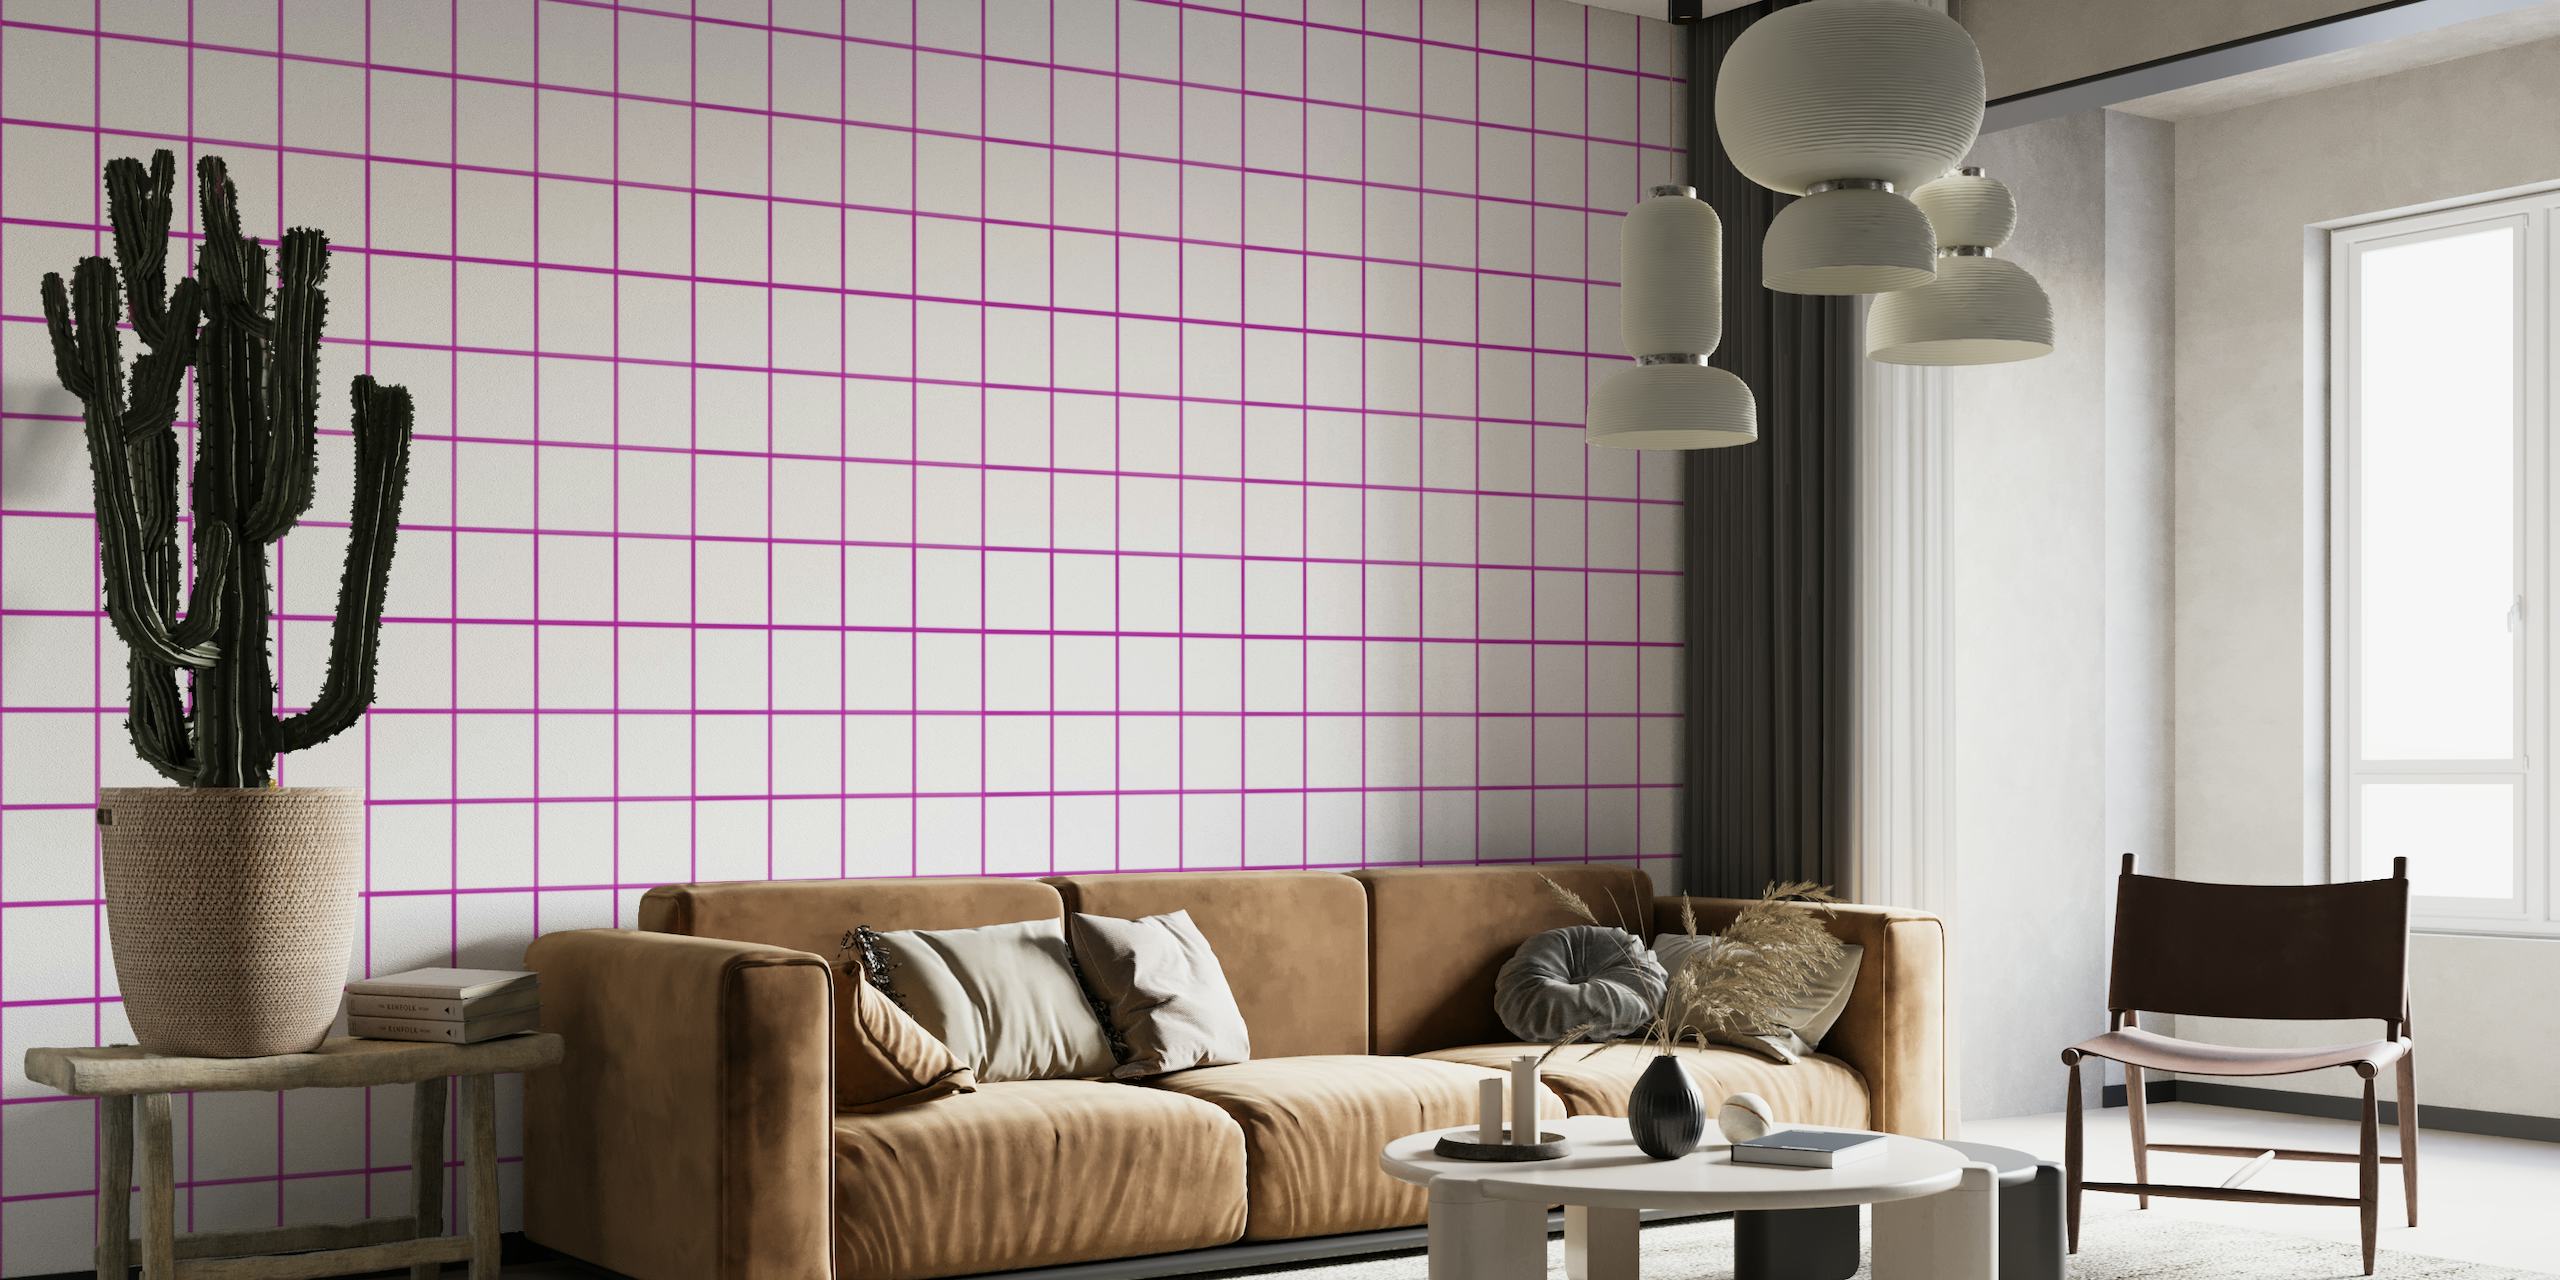 Purple grouted tiles ταπετσαρία